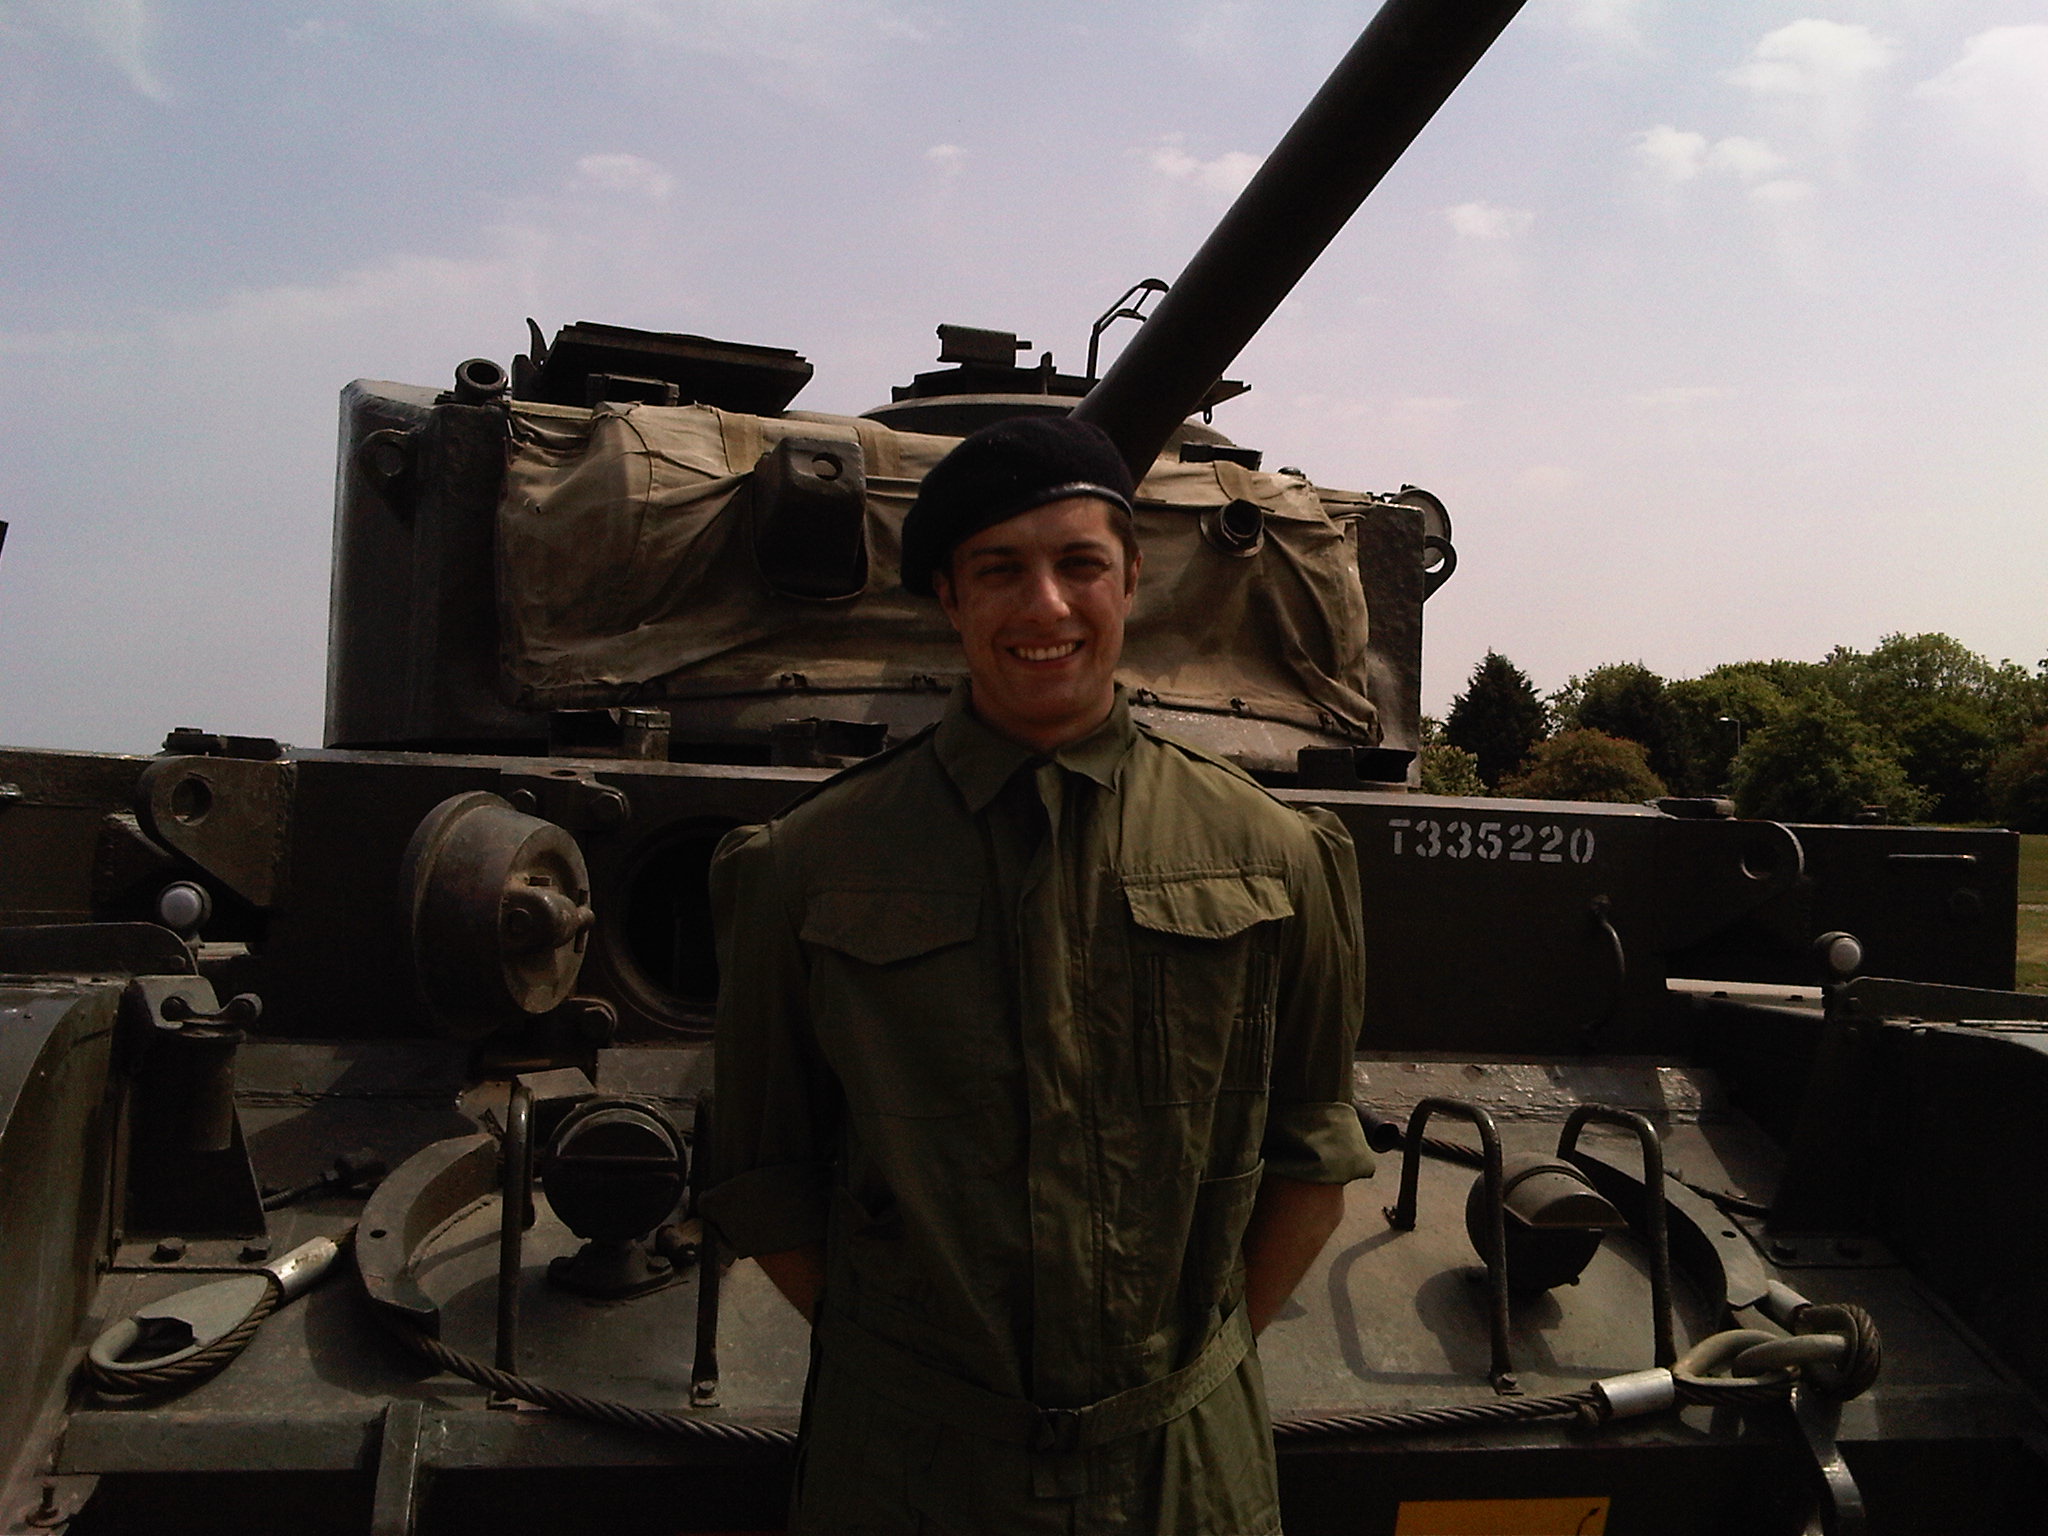 On set at Bovington Tank Museum for their promotional film.